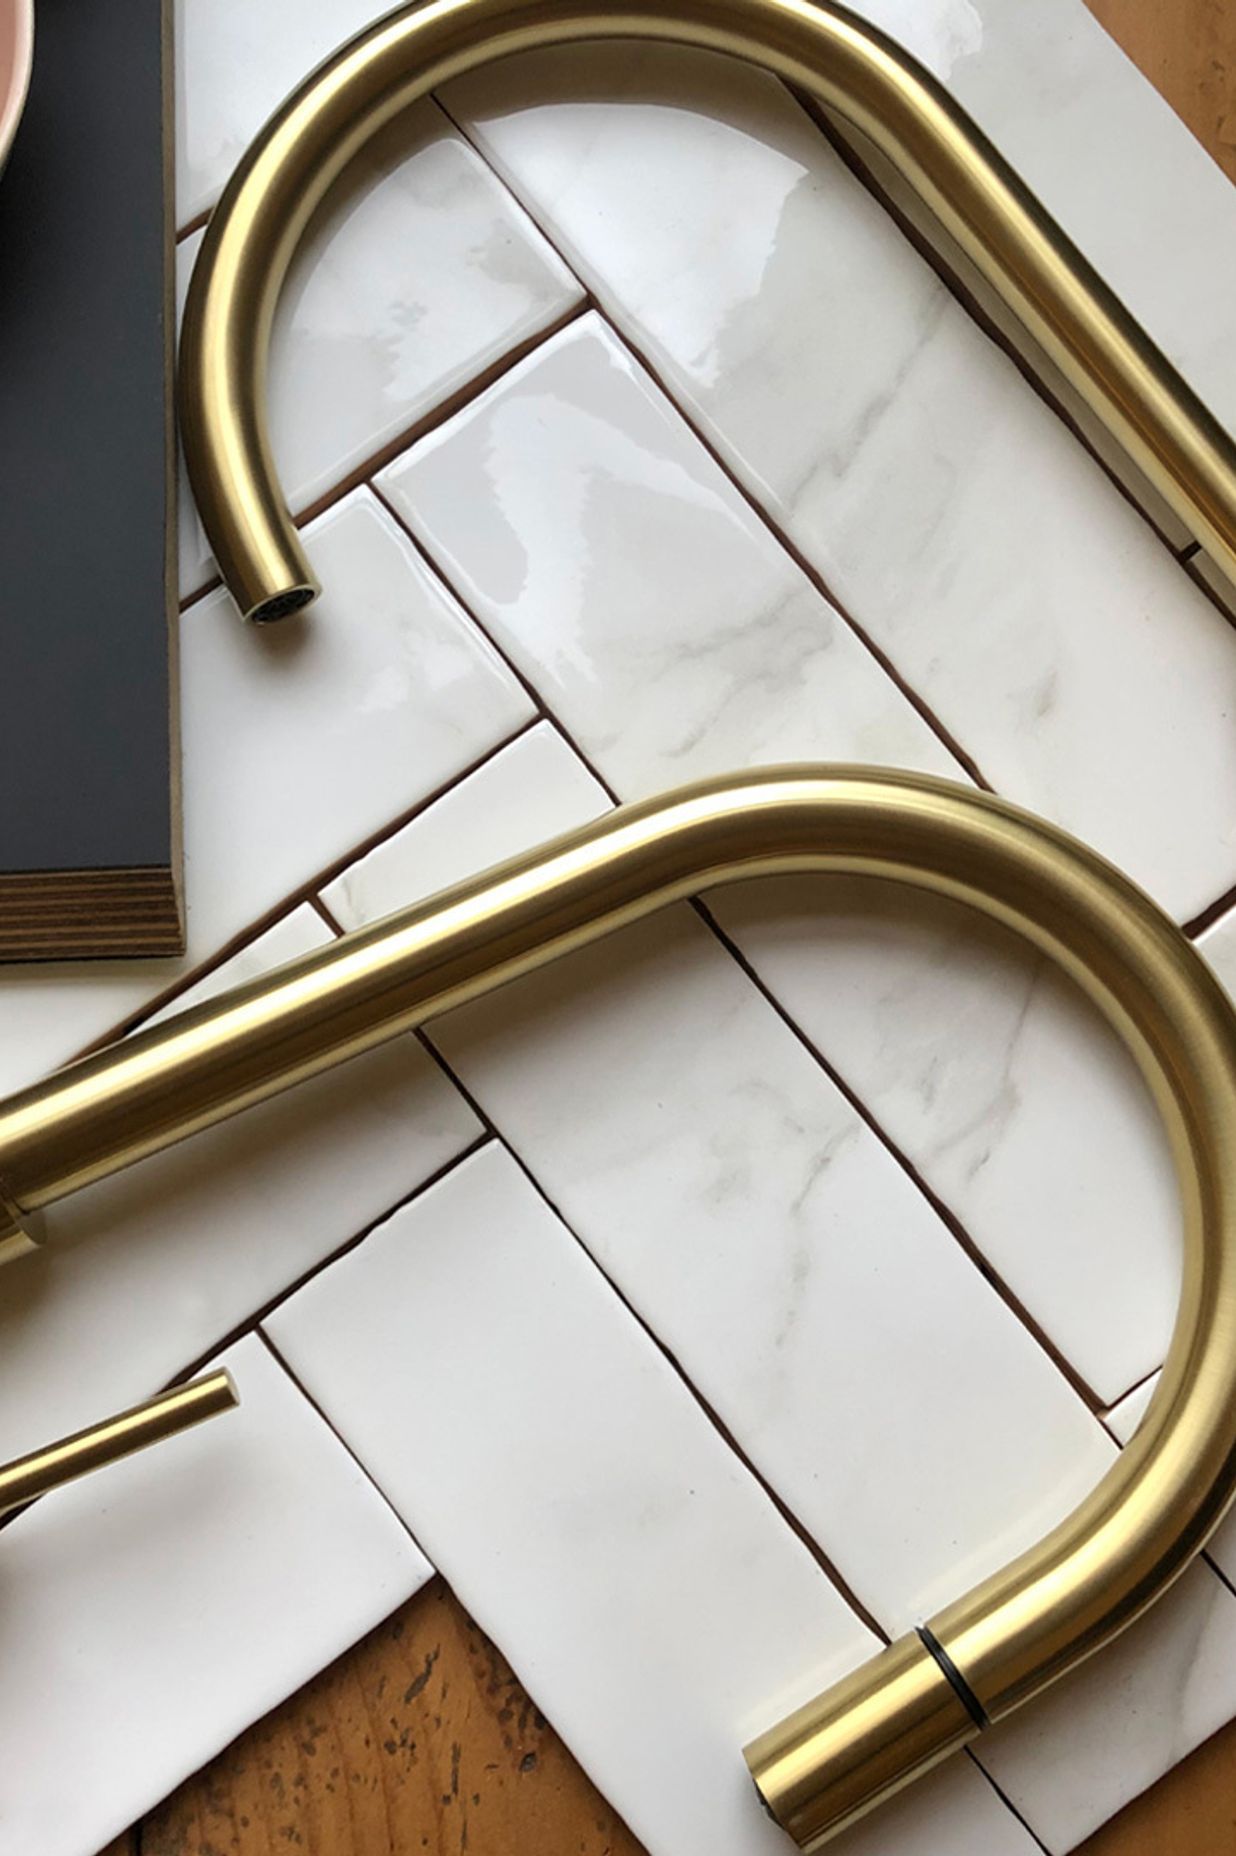 Voda uses the same advanced PVD coating system across their range, so Storm products can be easily matched with other products in the Voda range, including the striking new Voda Gooseneck Pull Out Sink Mixer in brushed brass.